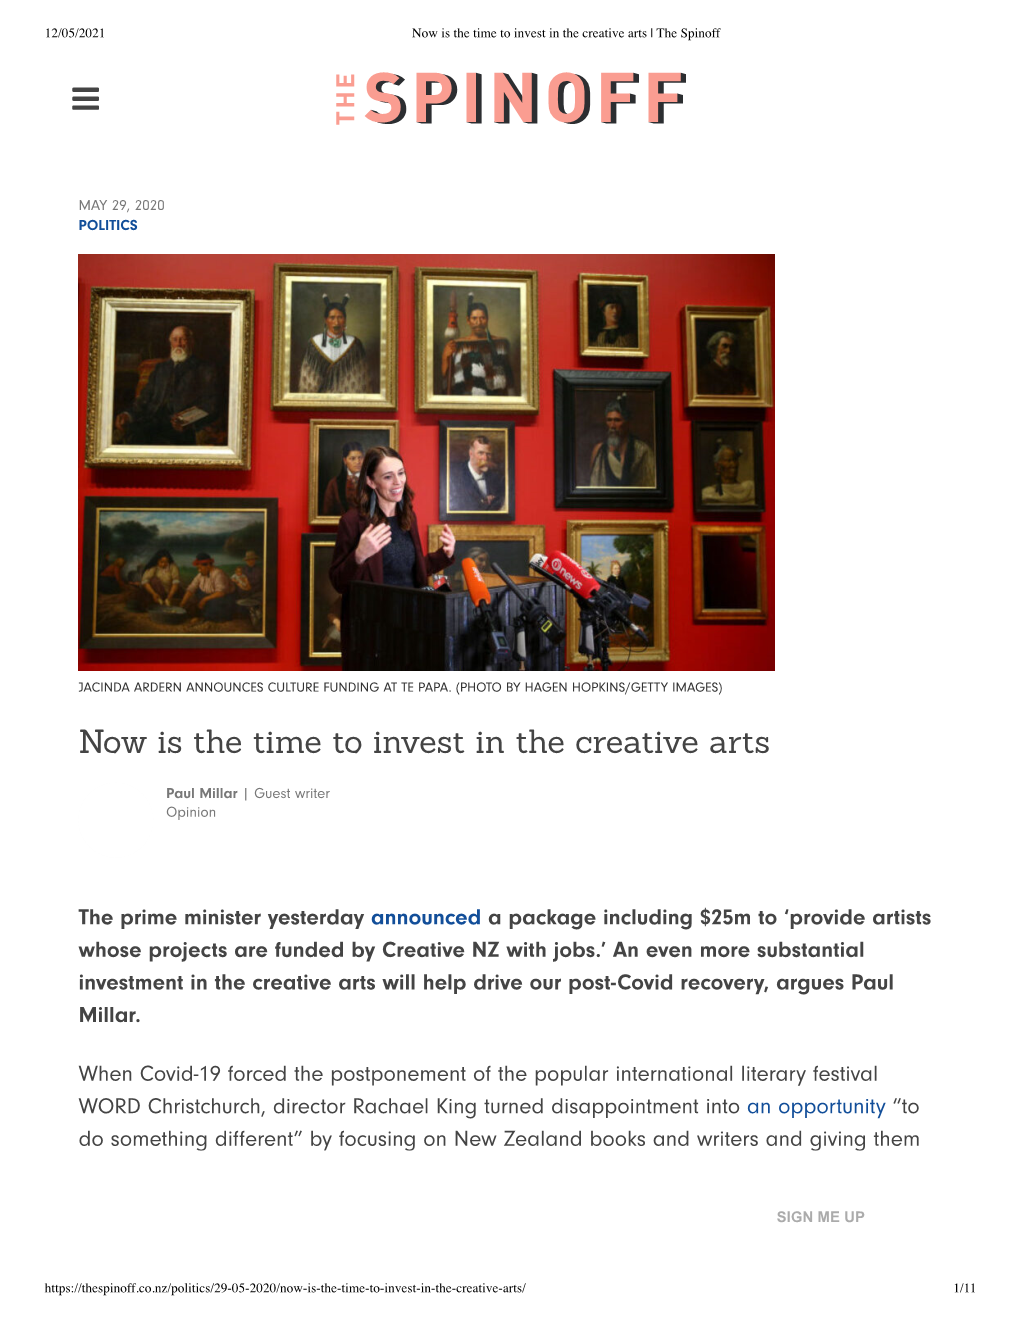 Now Is the Time to Invest in the Creative Arts | the Spinoff